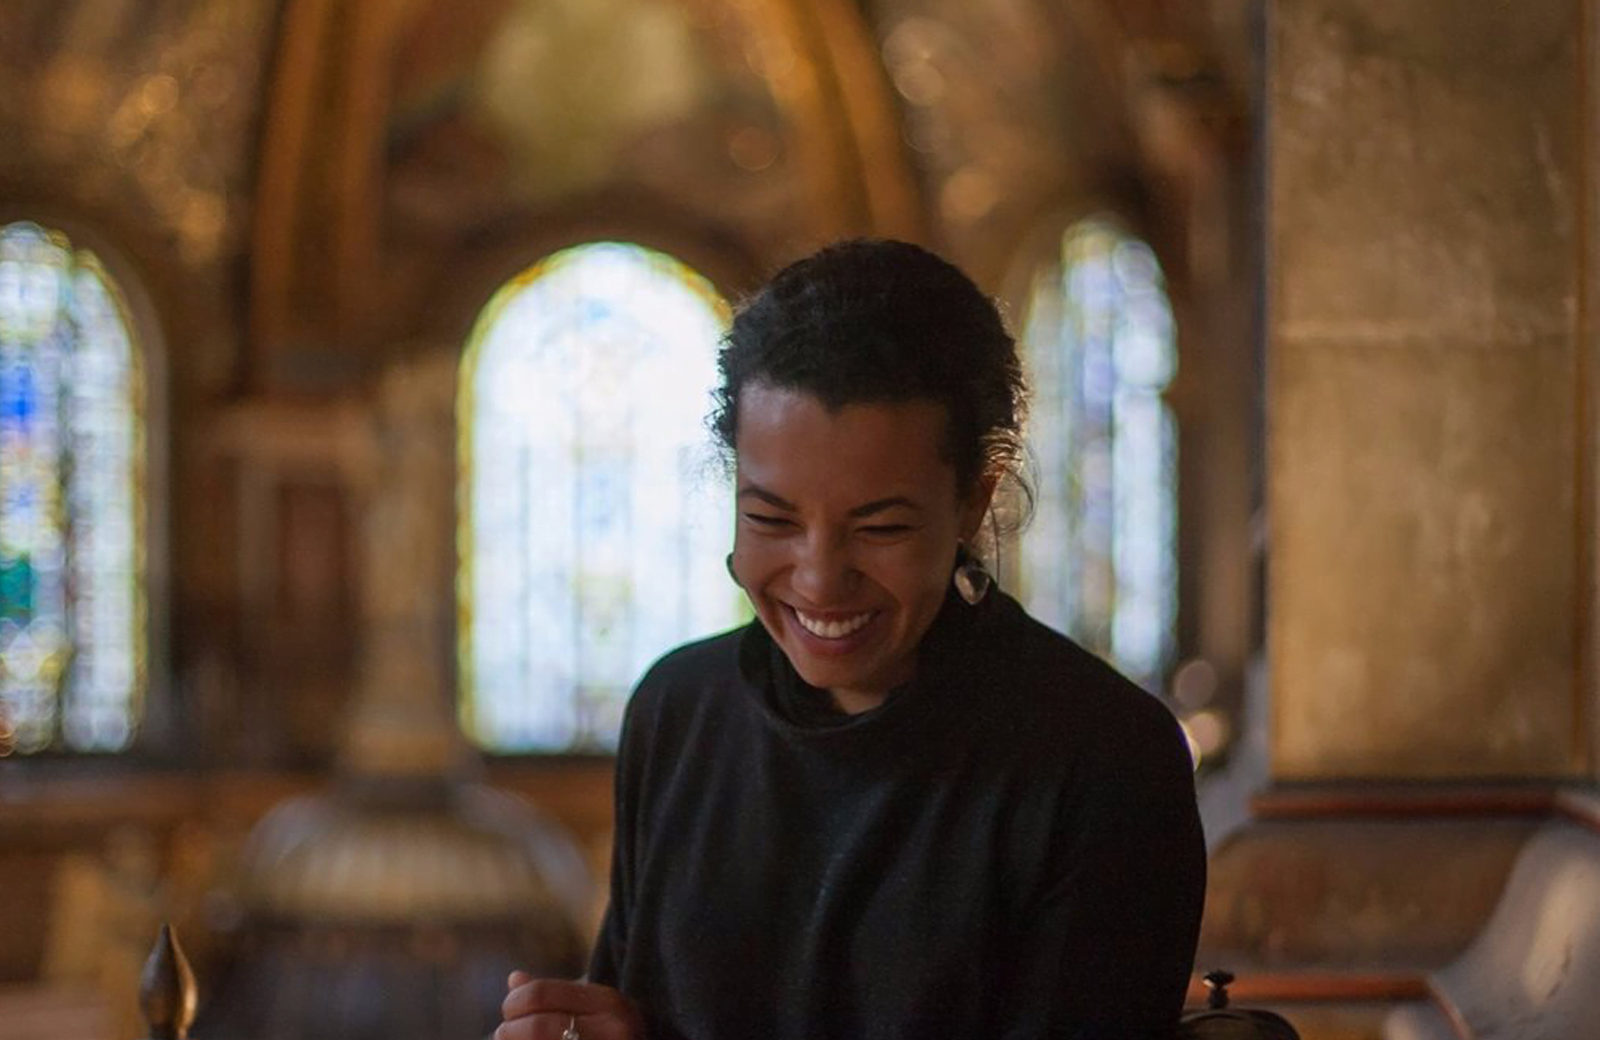 A smiling woman in a church wearing dark clothes. She's happy.